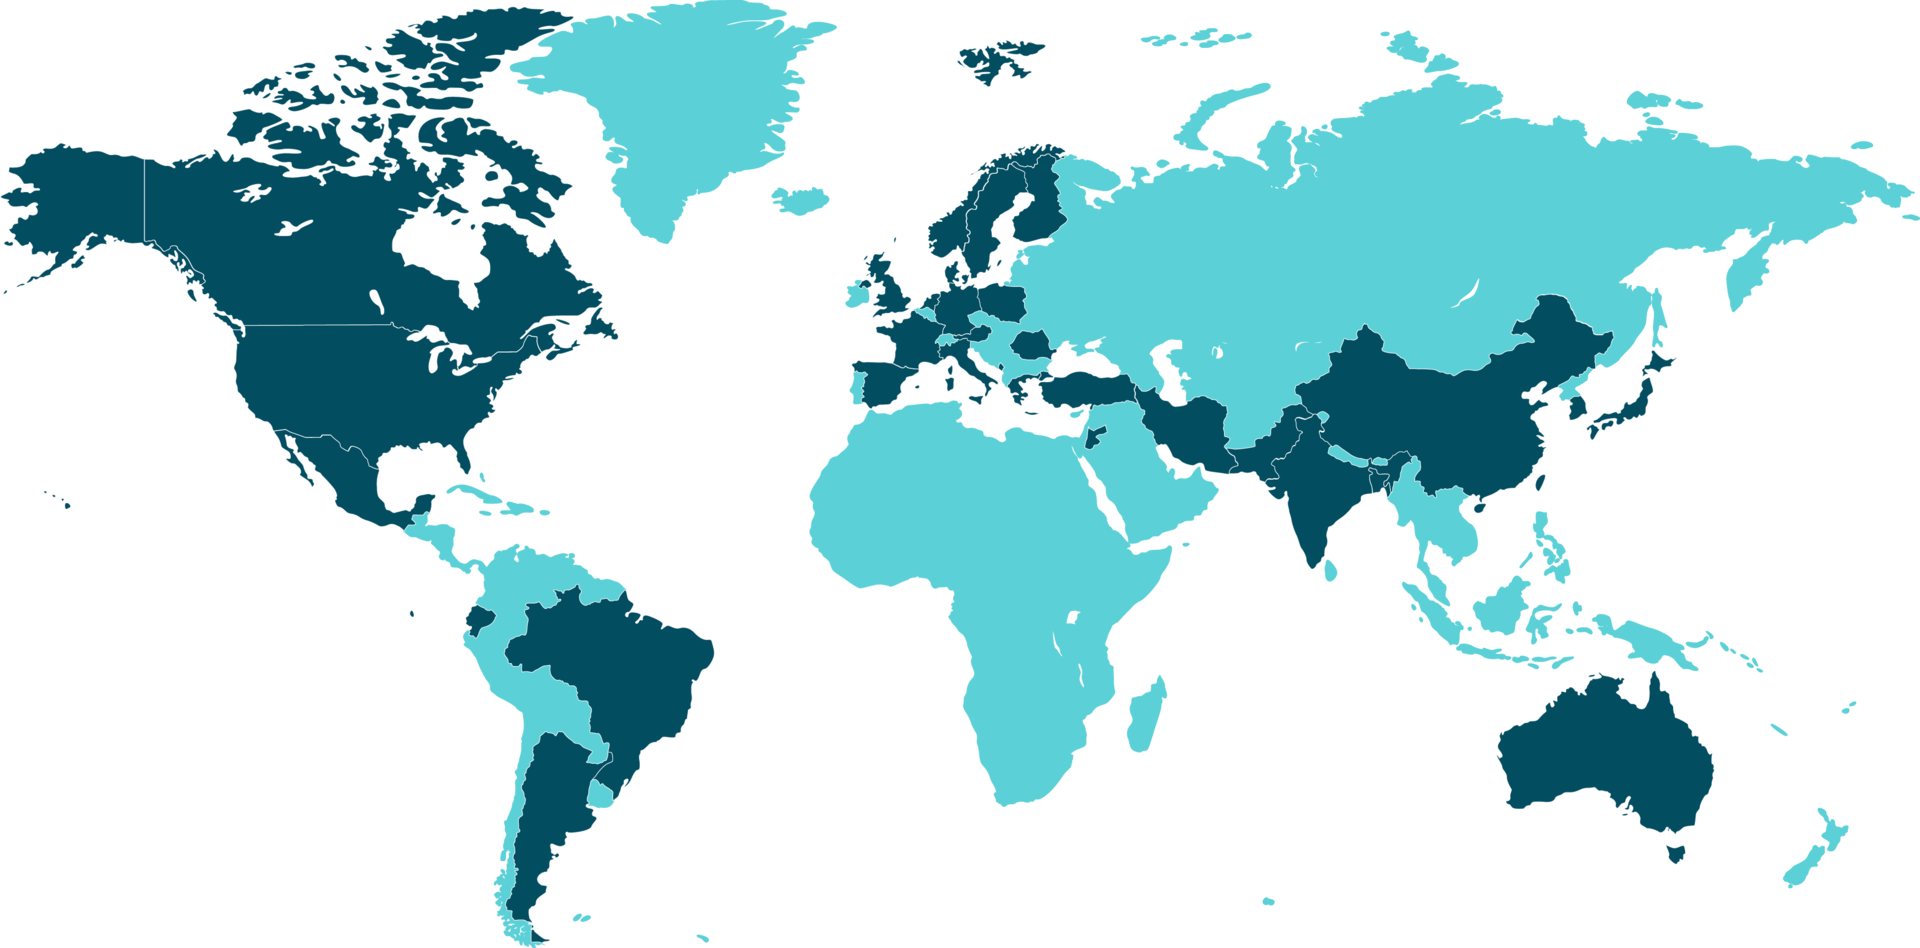 World map showing the countries RITMO's staff and guests come from.